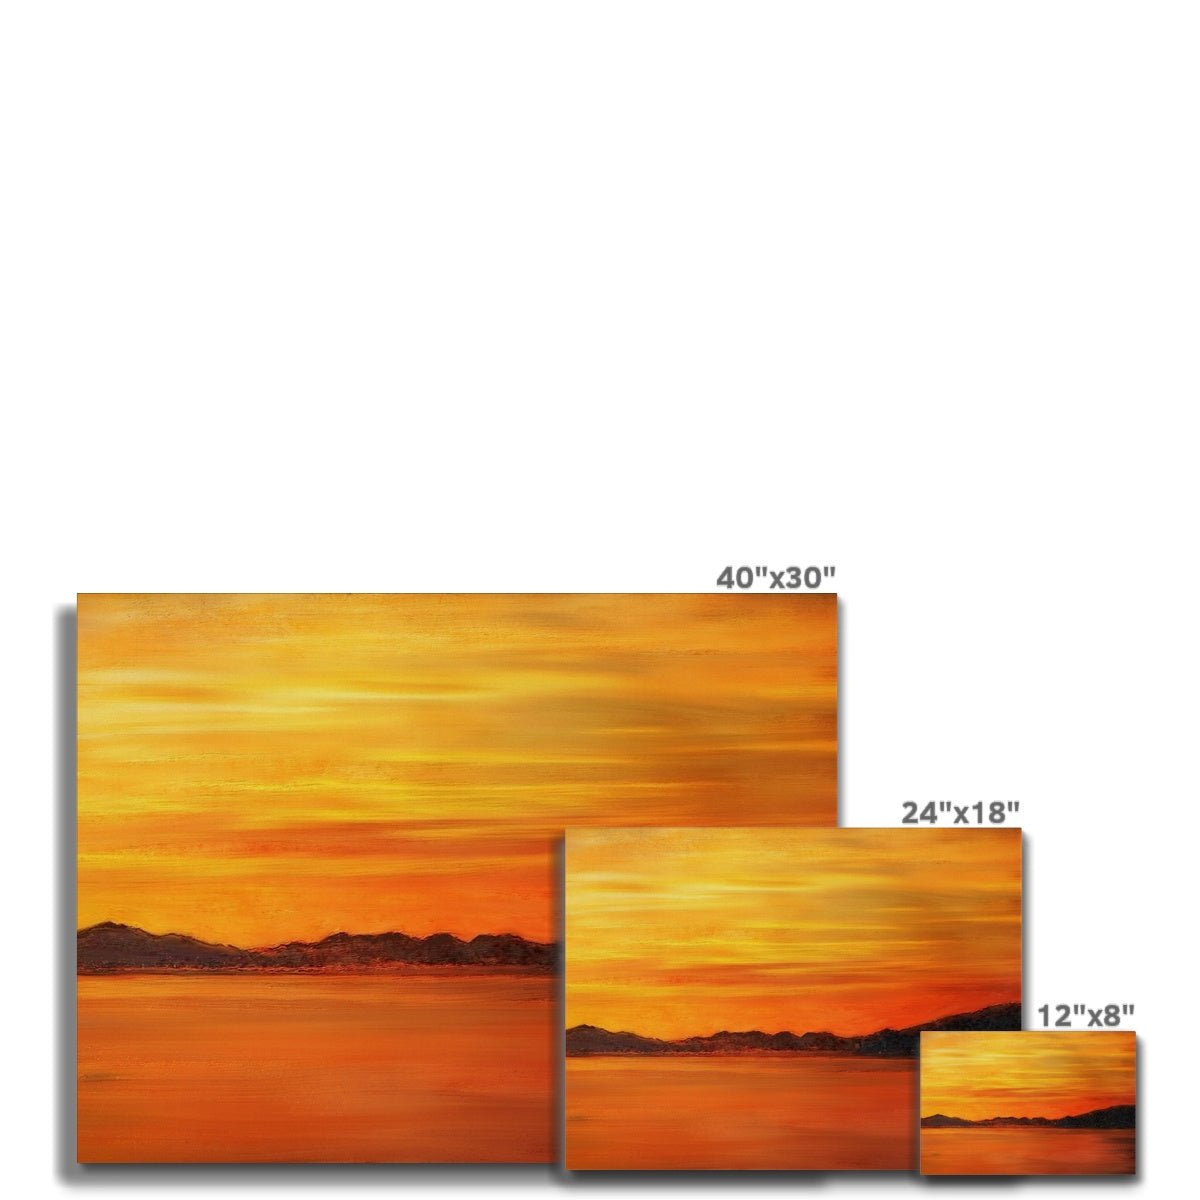 Loch Fyne Sunset Painting | Canvas From Scotland-Contemporary Stretched Canvas Prints-Scottish Lochs & Mountains Art Gallery-Paintings, Prints, Homeware, Art Gifts From Scotland By Scottish Artist Kevin Hunter